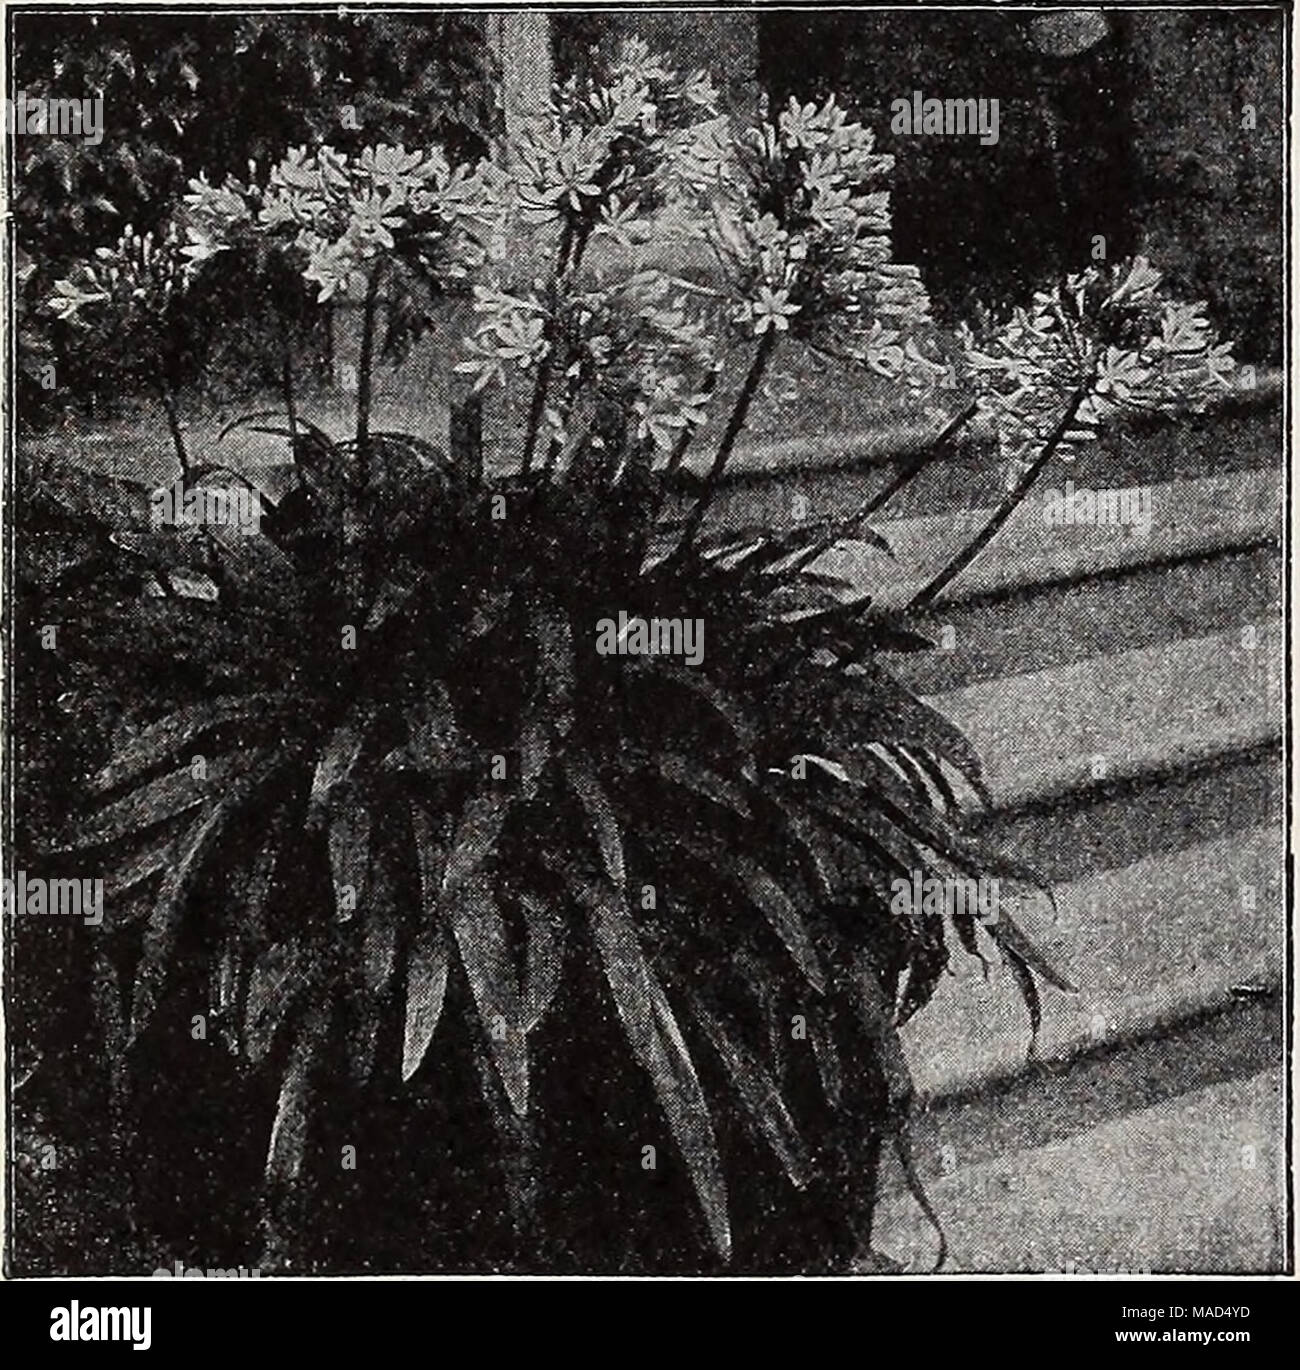 . Dreer's wholesale catalog for florists and market gardeners : 1939 winter spring summer . Agapanthus umbellatus Agapanthus Umbellatus. Strong plants in 6-inch pots. 75c each. Strong plants in 8-inch tubs, $2.50 each. Aglaonema Modestum (Chinese Evergreen). Showy rich green leaves. A choice house plant that may be grown in soil or in bowls filled with water. 2%-inch pots $2.00 $io.OOÂ°per 10'0Â°Â° ^ 10Â°' 3&quot;inÂ°h PÂ°tS' $3,Â°Â° per ^0Z-; AloysiaâLemon Verbena Citriodora. 3-inch pots $2.25 per doz.; $14.00 per 100. AnthuriumâFlamingo Flower Scherzerianum Hybrids. 3-inch pots 60c: 4-inch p Stock Photo